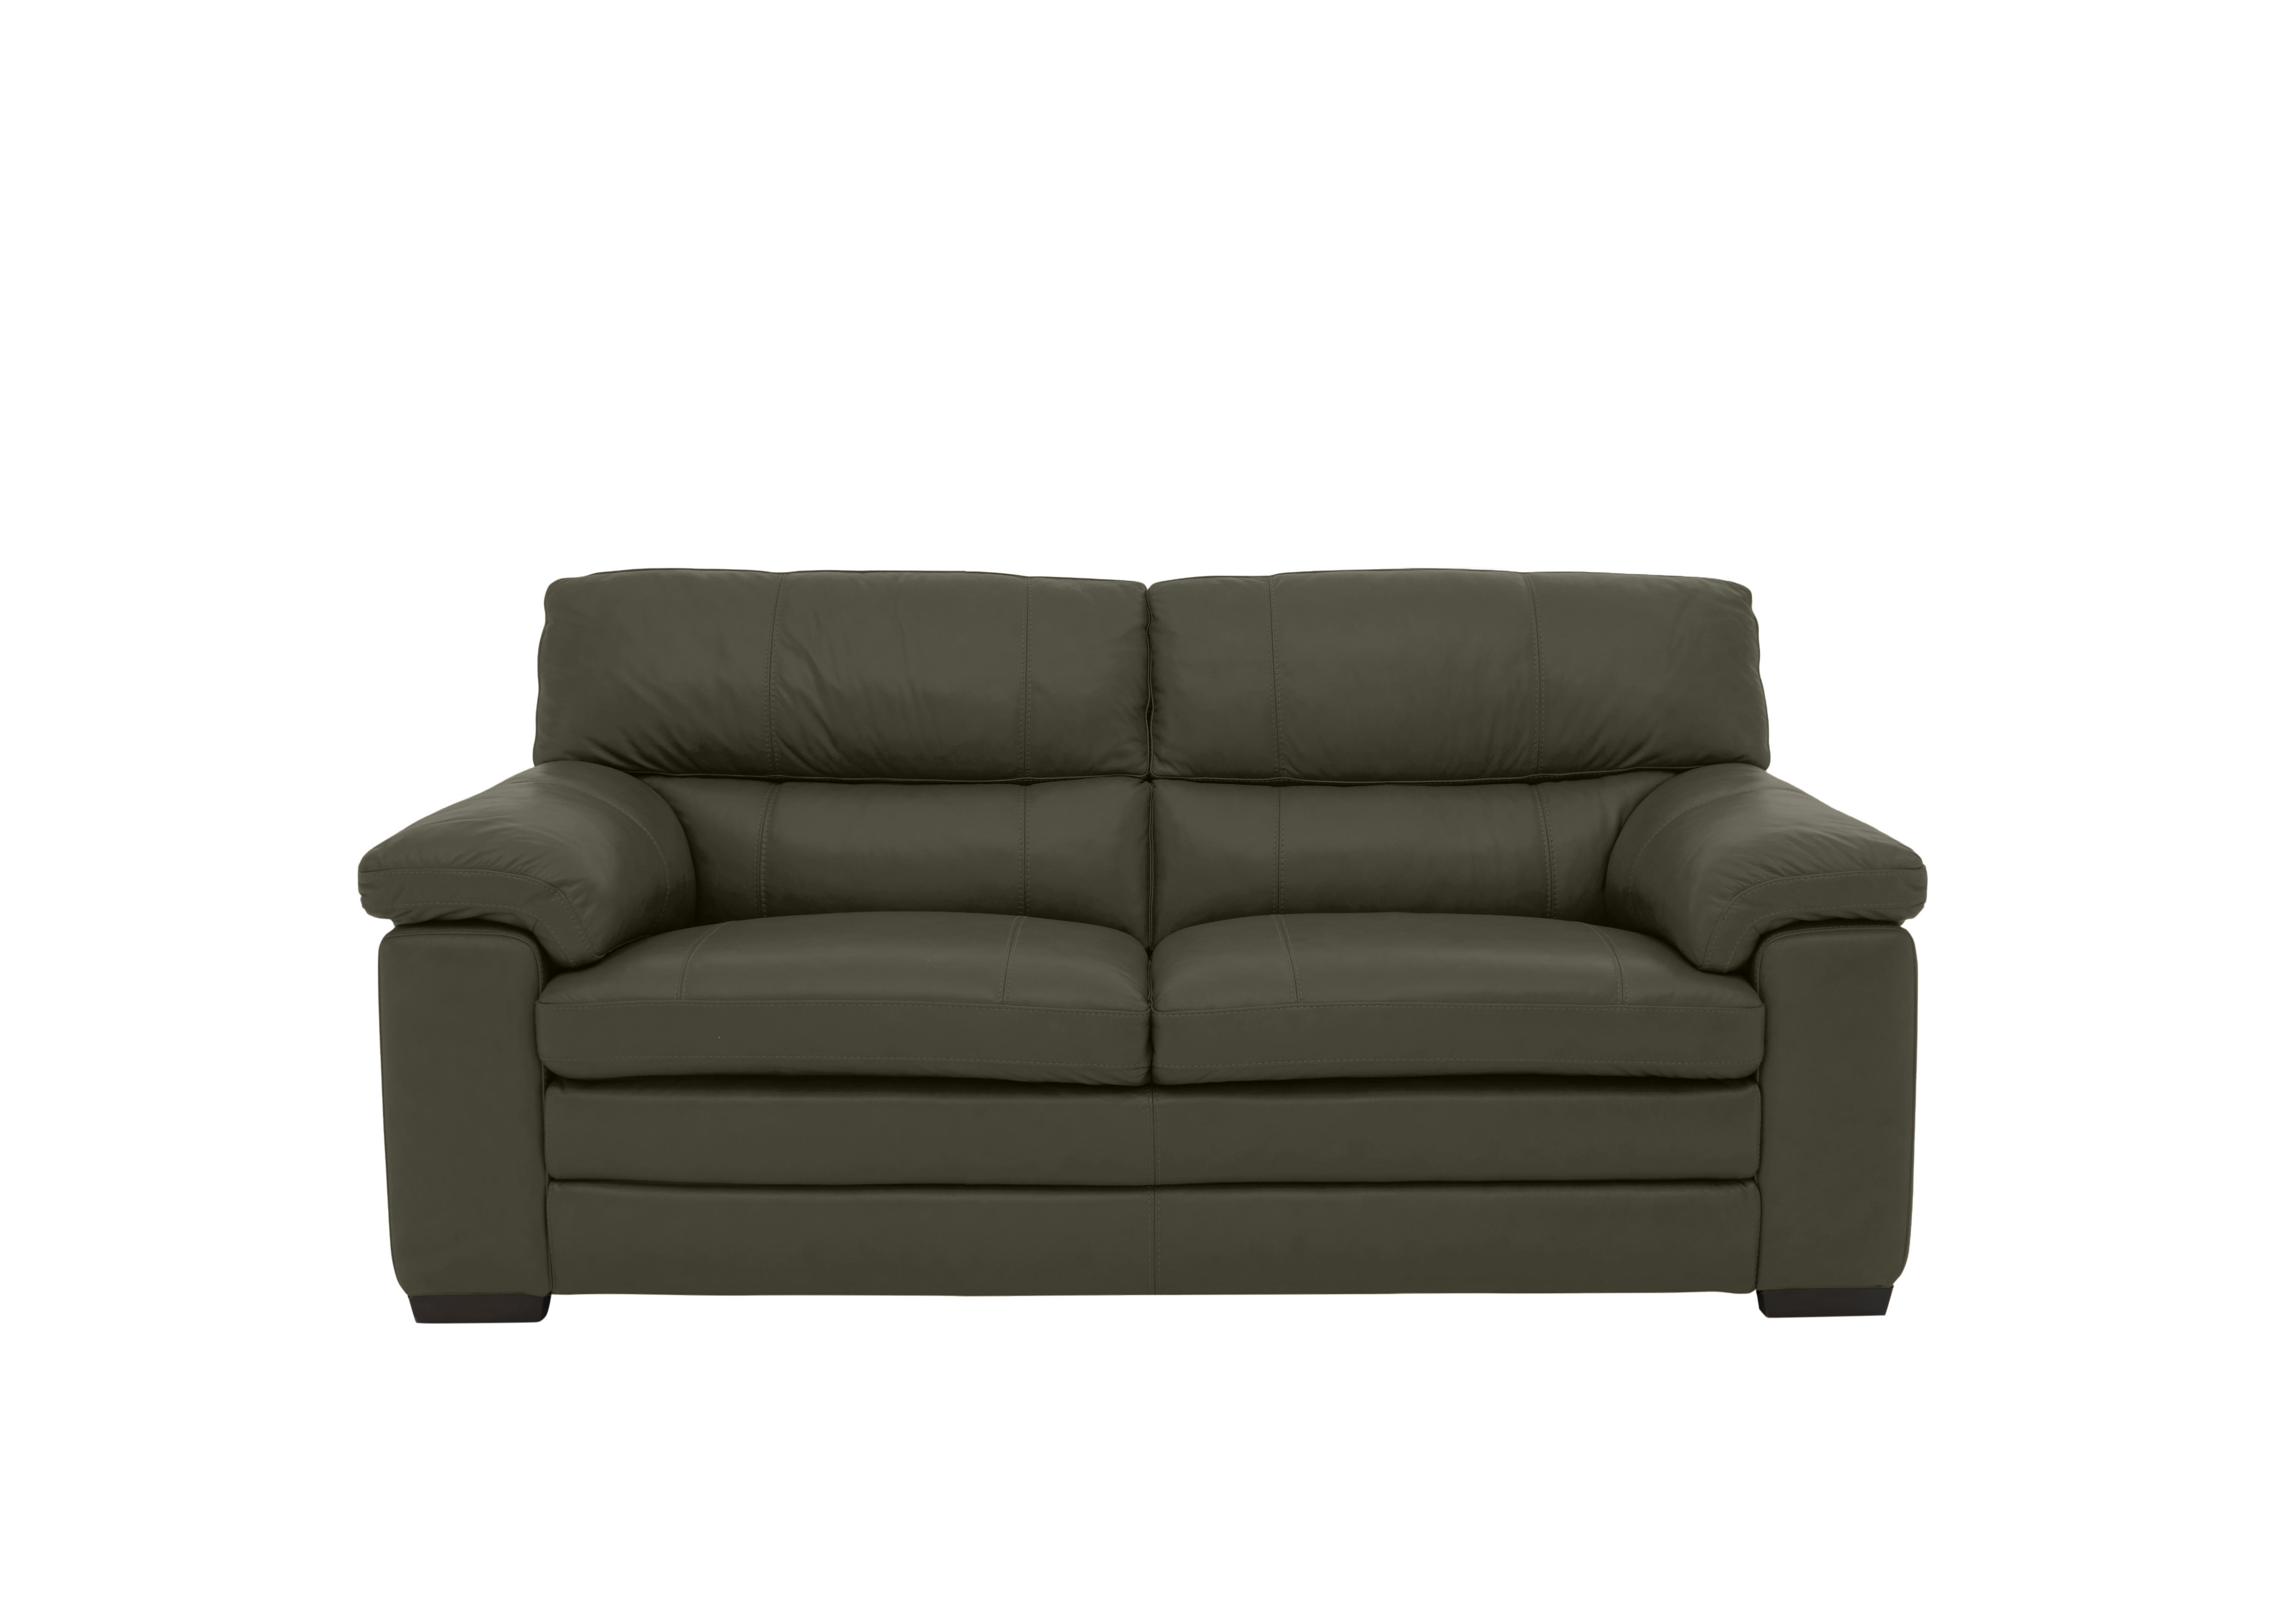 Cozee 2 Seater Pure Premium Leather Sofa in Nw-548e Olive on Furniture Village